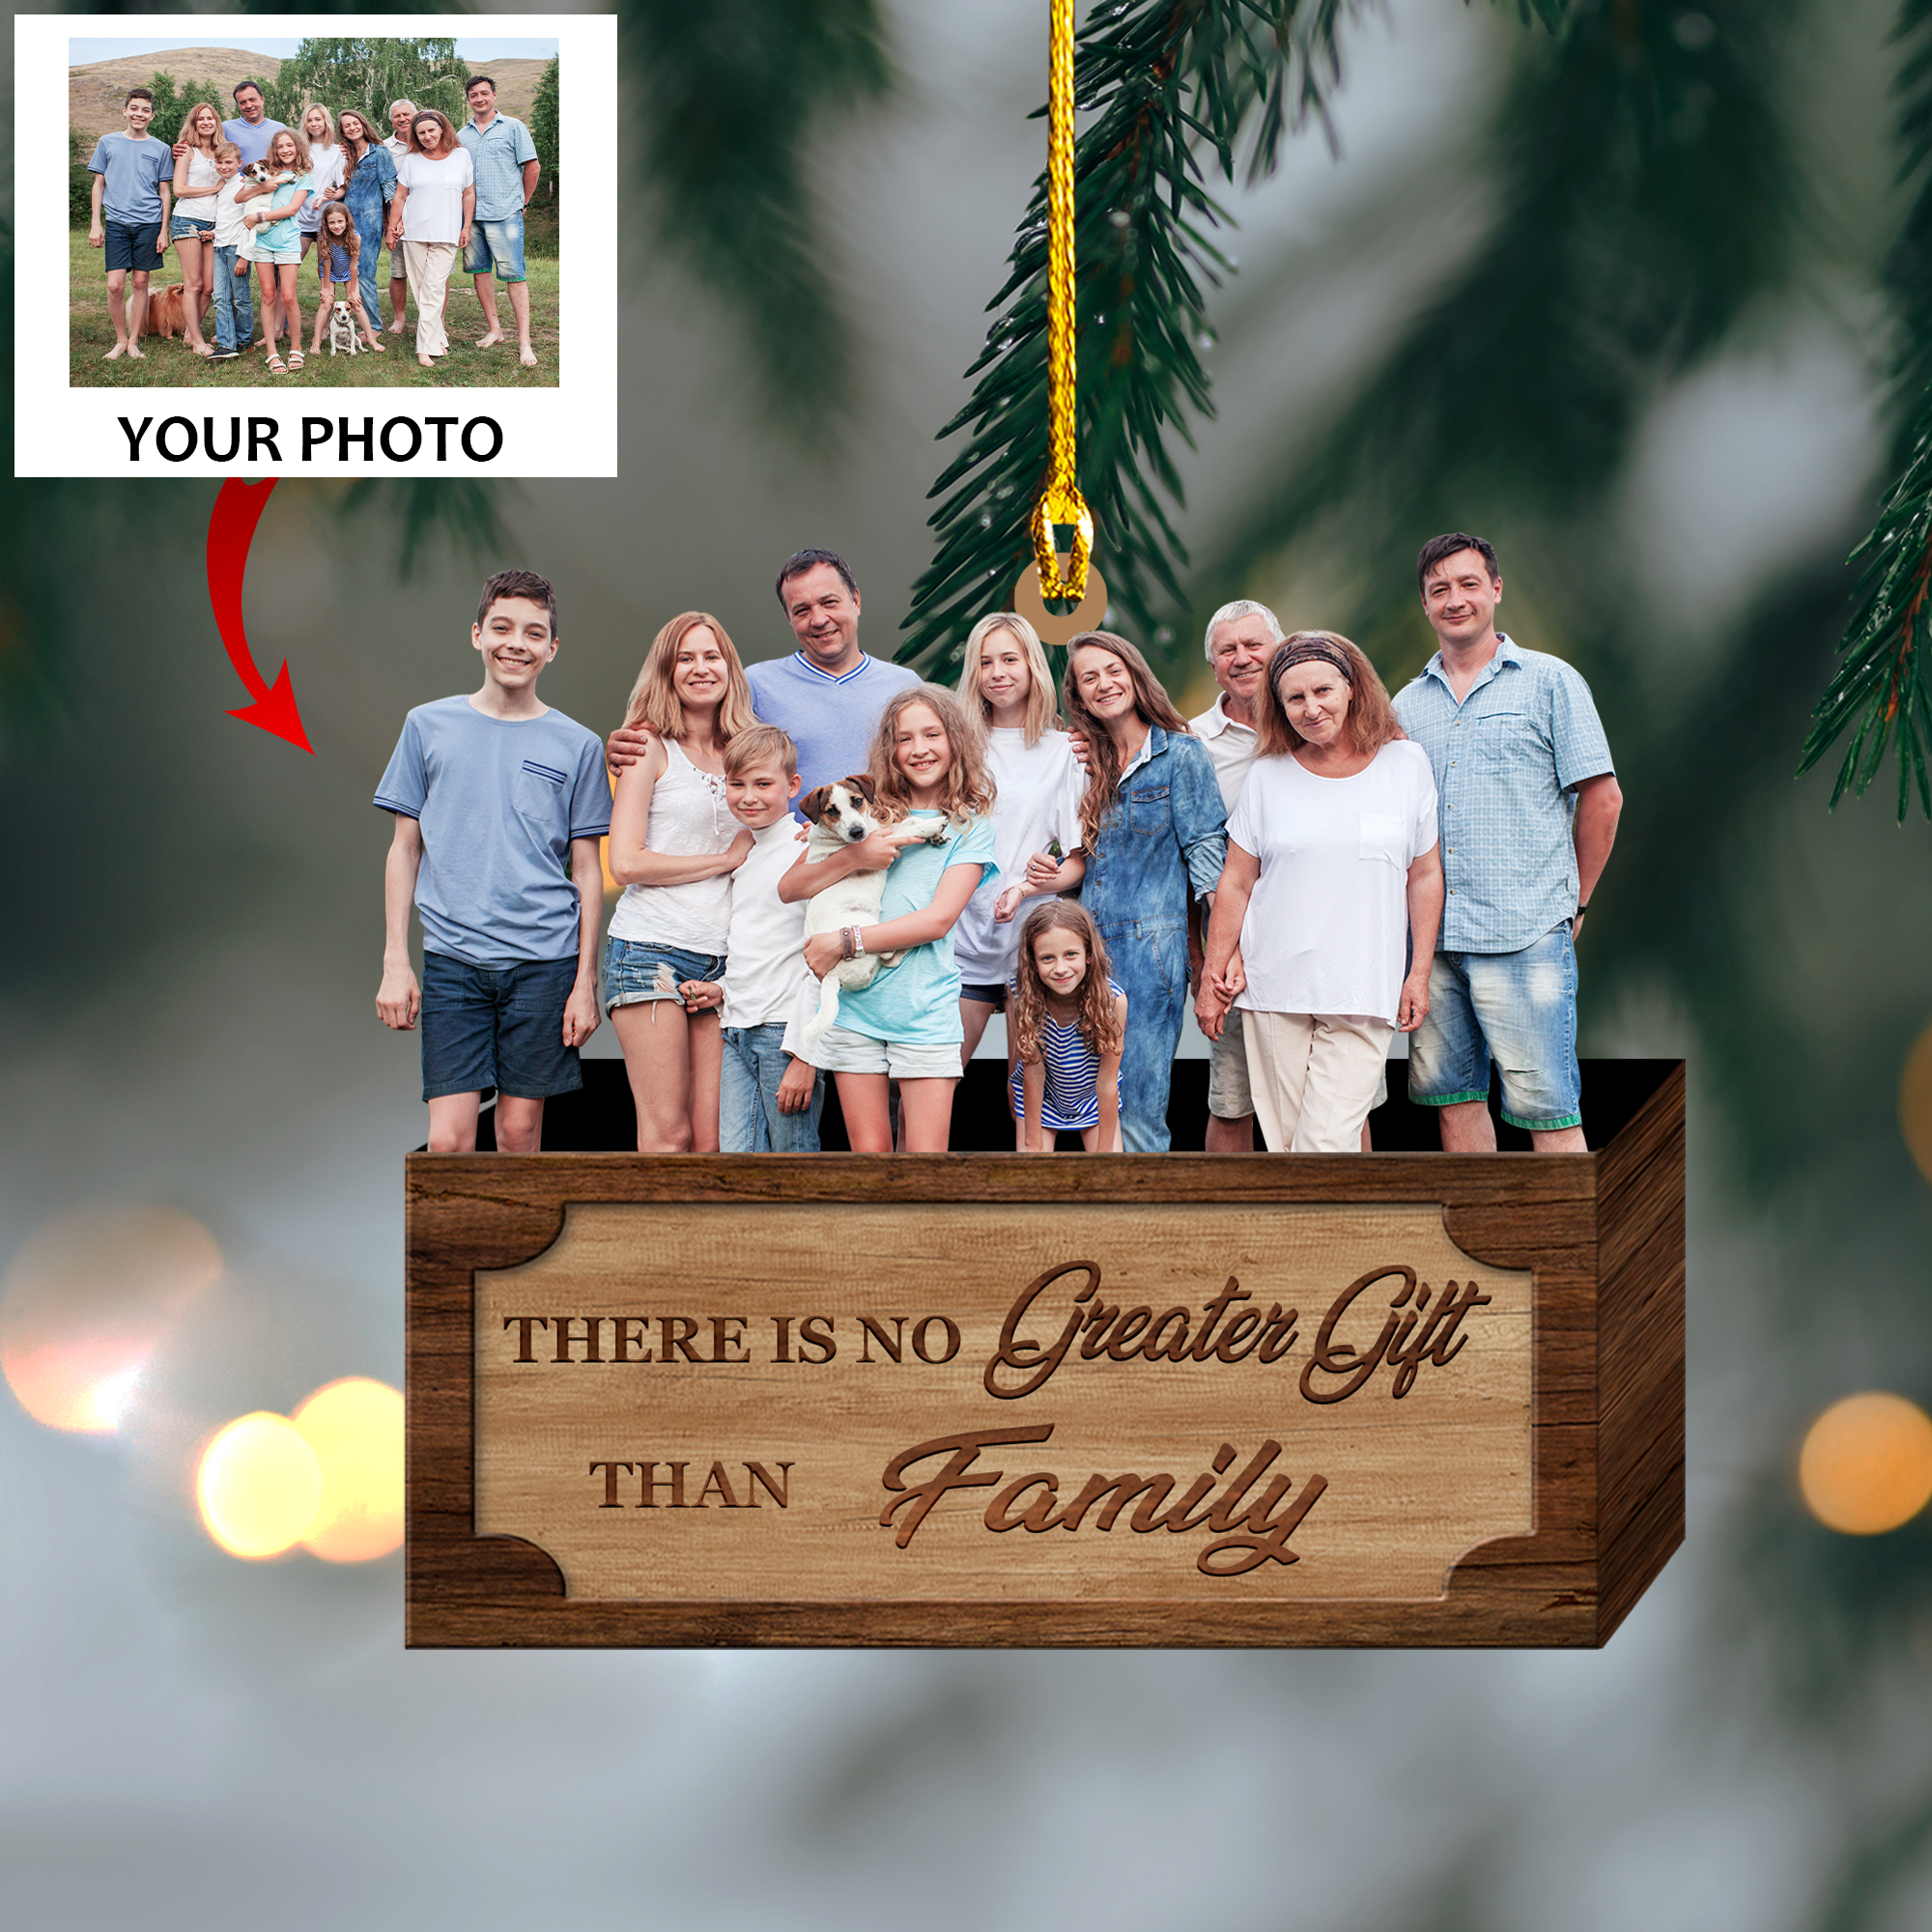 There Is No Greater Gift Than Family - Custom Photo Ornament - Christmas, Birthday Gift For Family, Family Members, Mom, Dad, Husband, Wife  | Family